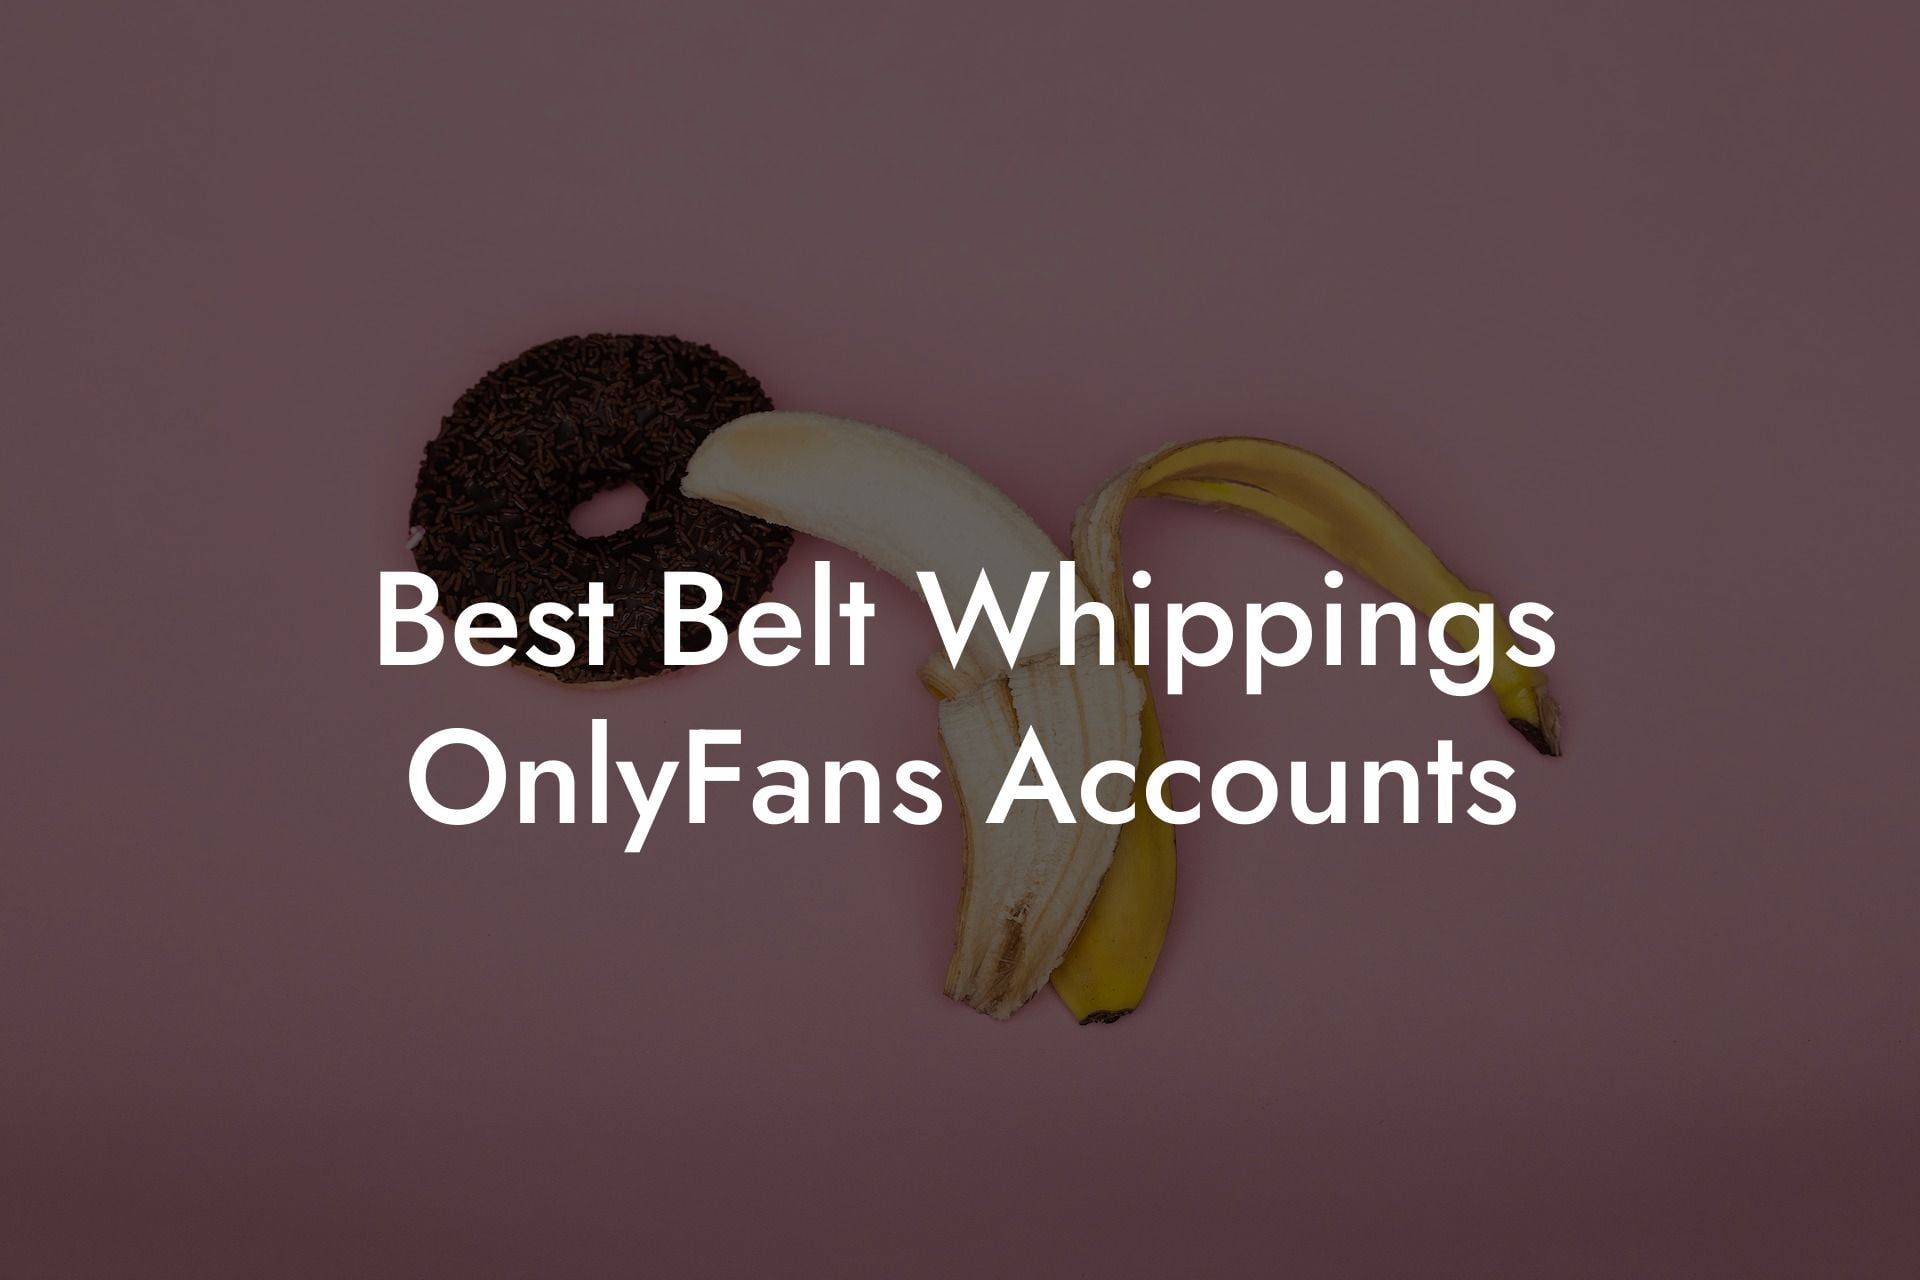 Best Belt Whippings OnlyFans Accounts